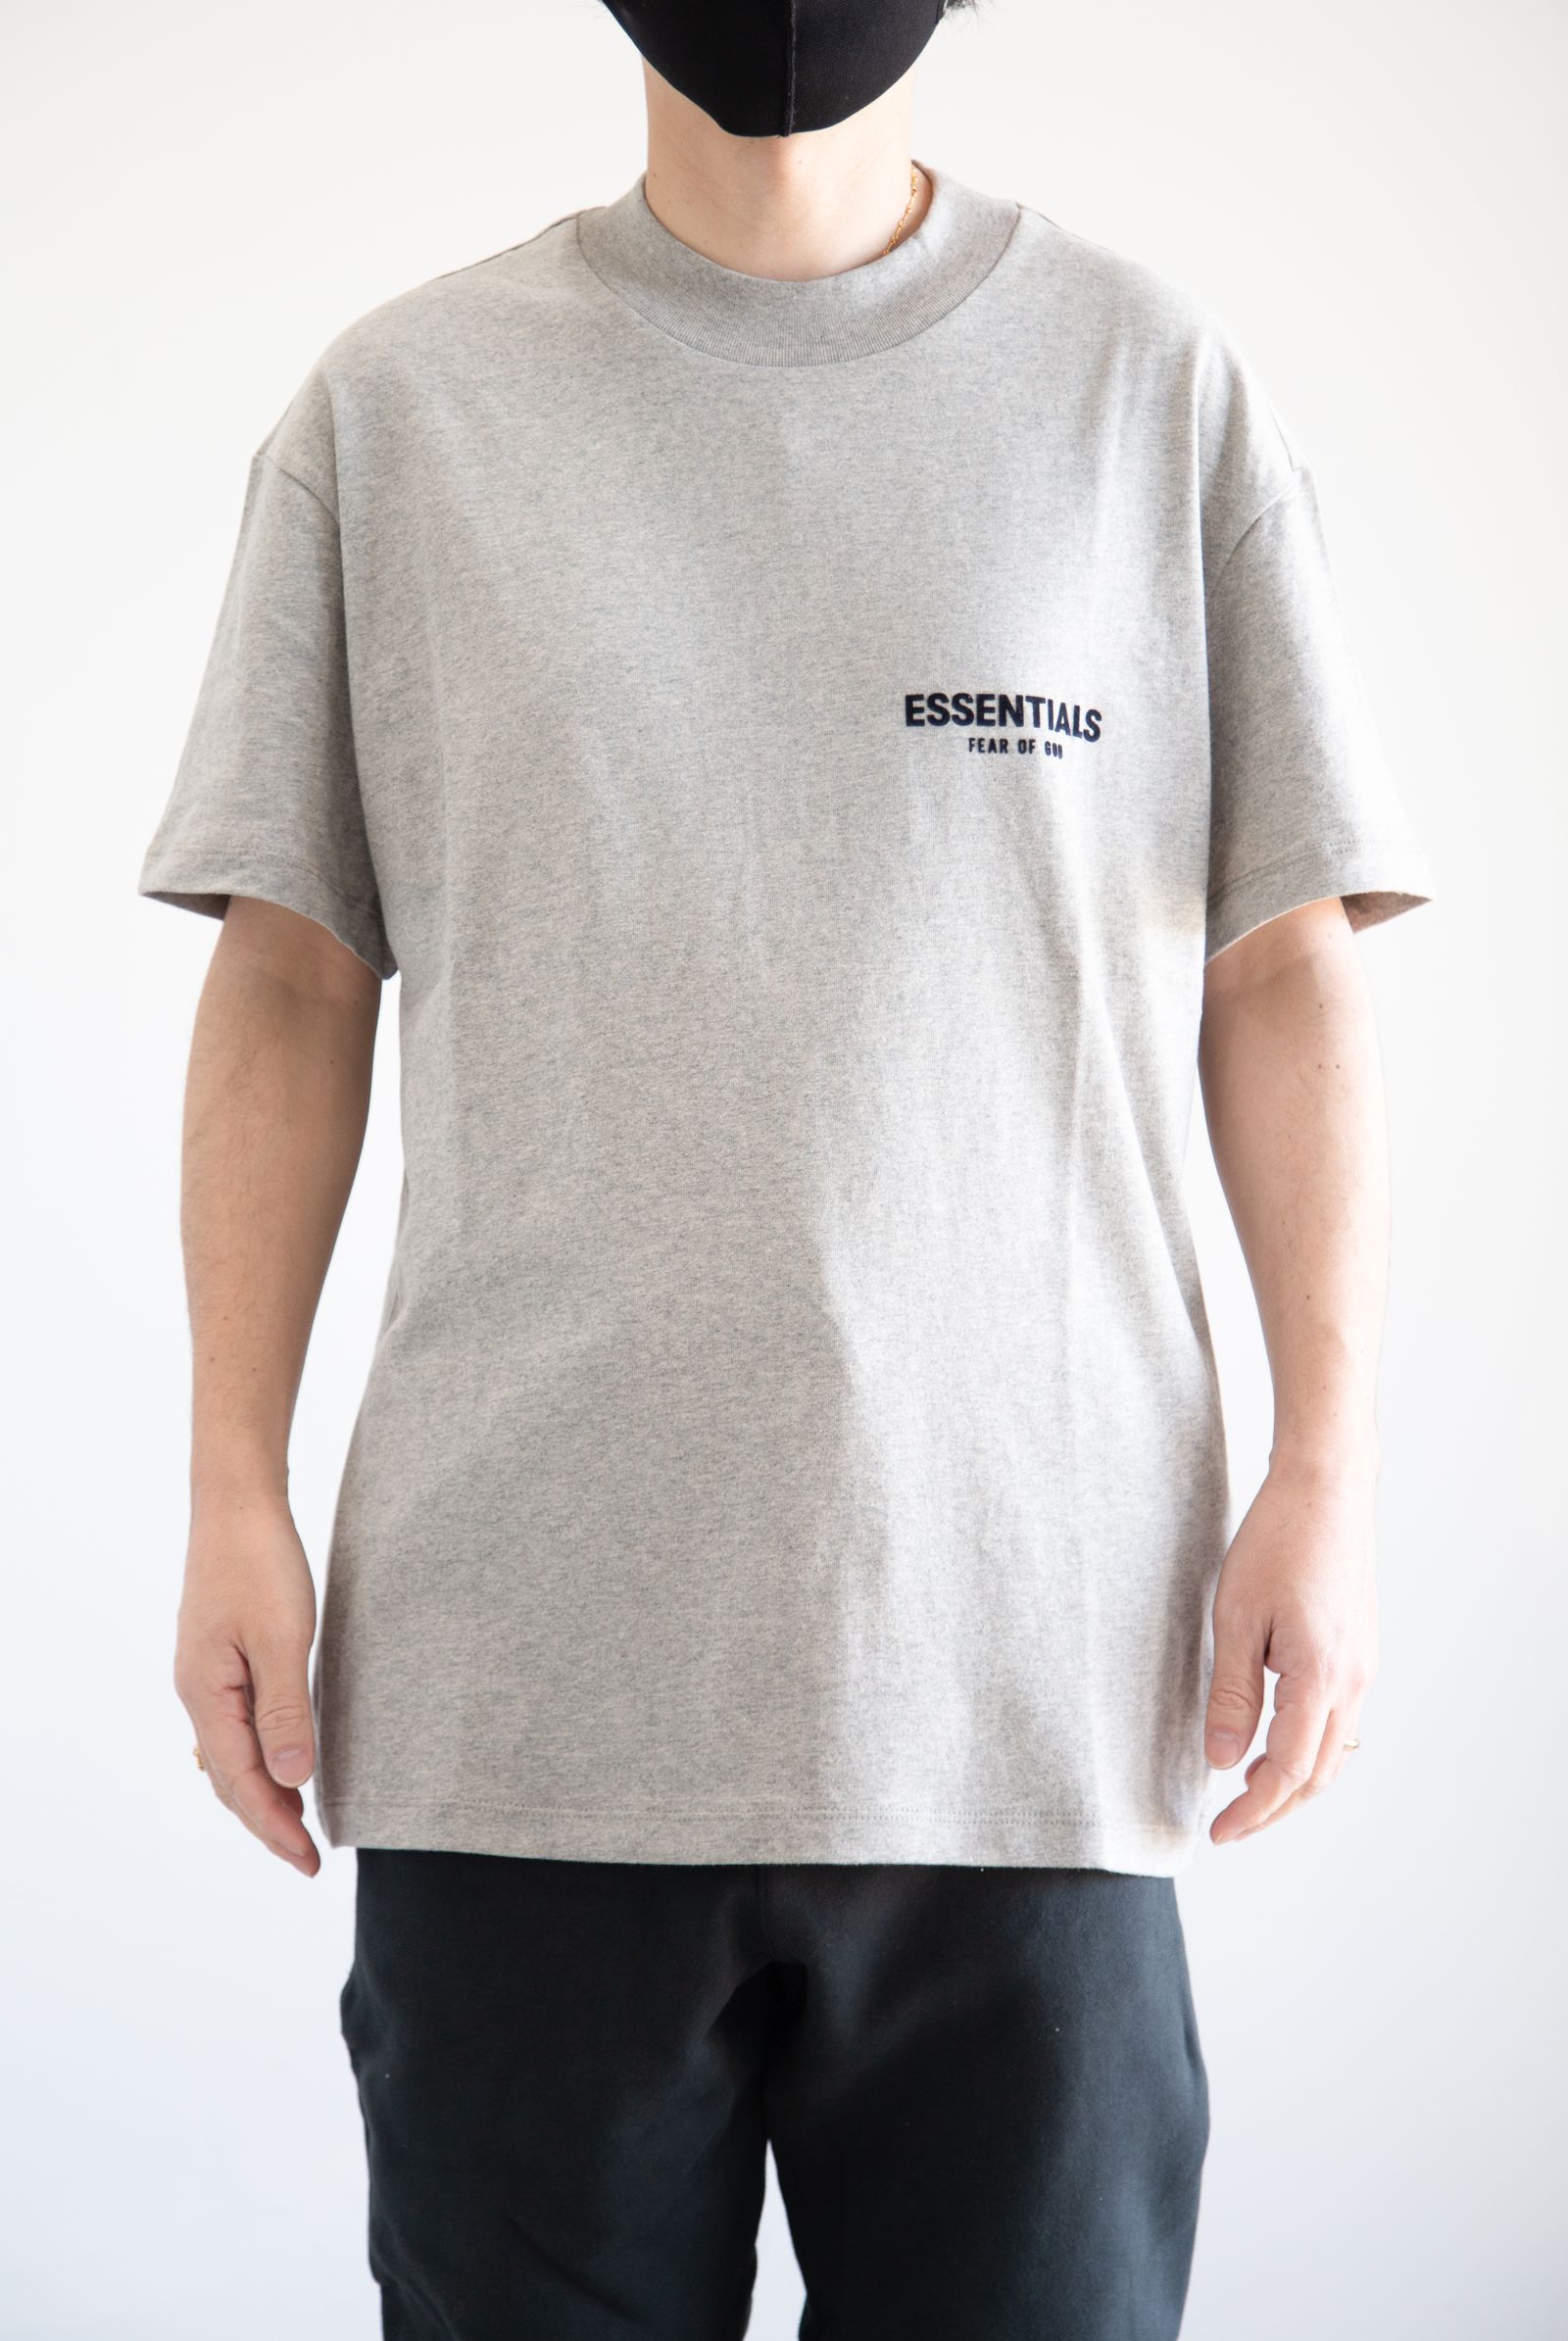 FOG ESSENTIALS - 22SS BACK LOGO S/S TEE / ダークオートミール | Tempt